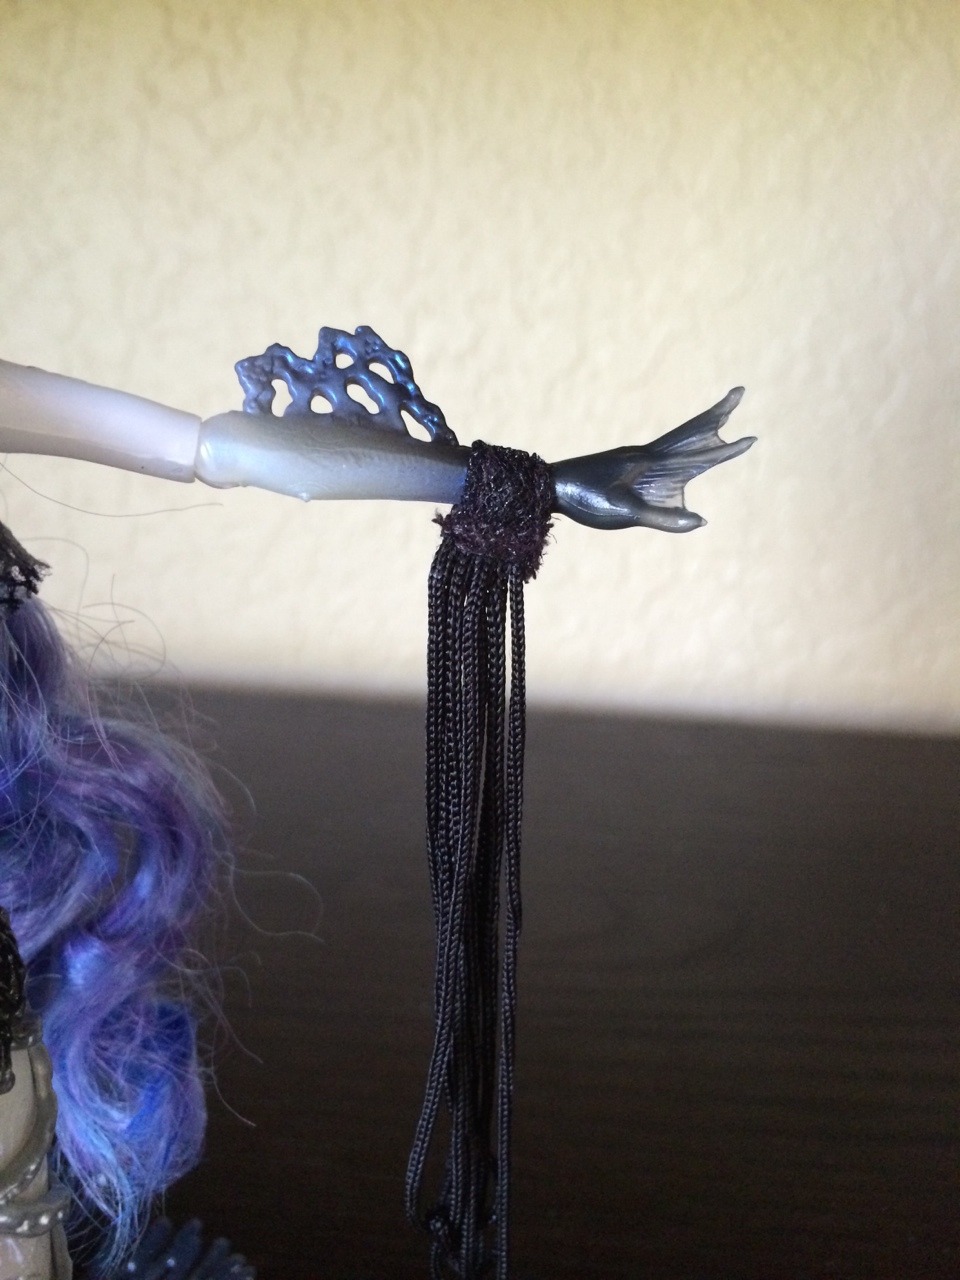 frozenmonsterhigh:

Sirena Von Boo details pictures. She is a very detailed doll, and i’m surprised to see her “Ghost Fin” in her back. And also the details in her tail, she has little stars.